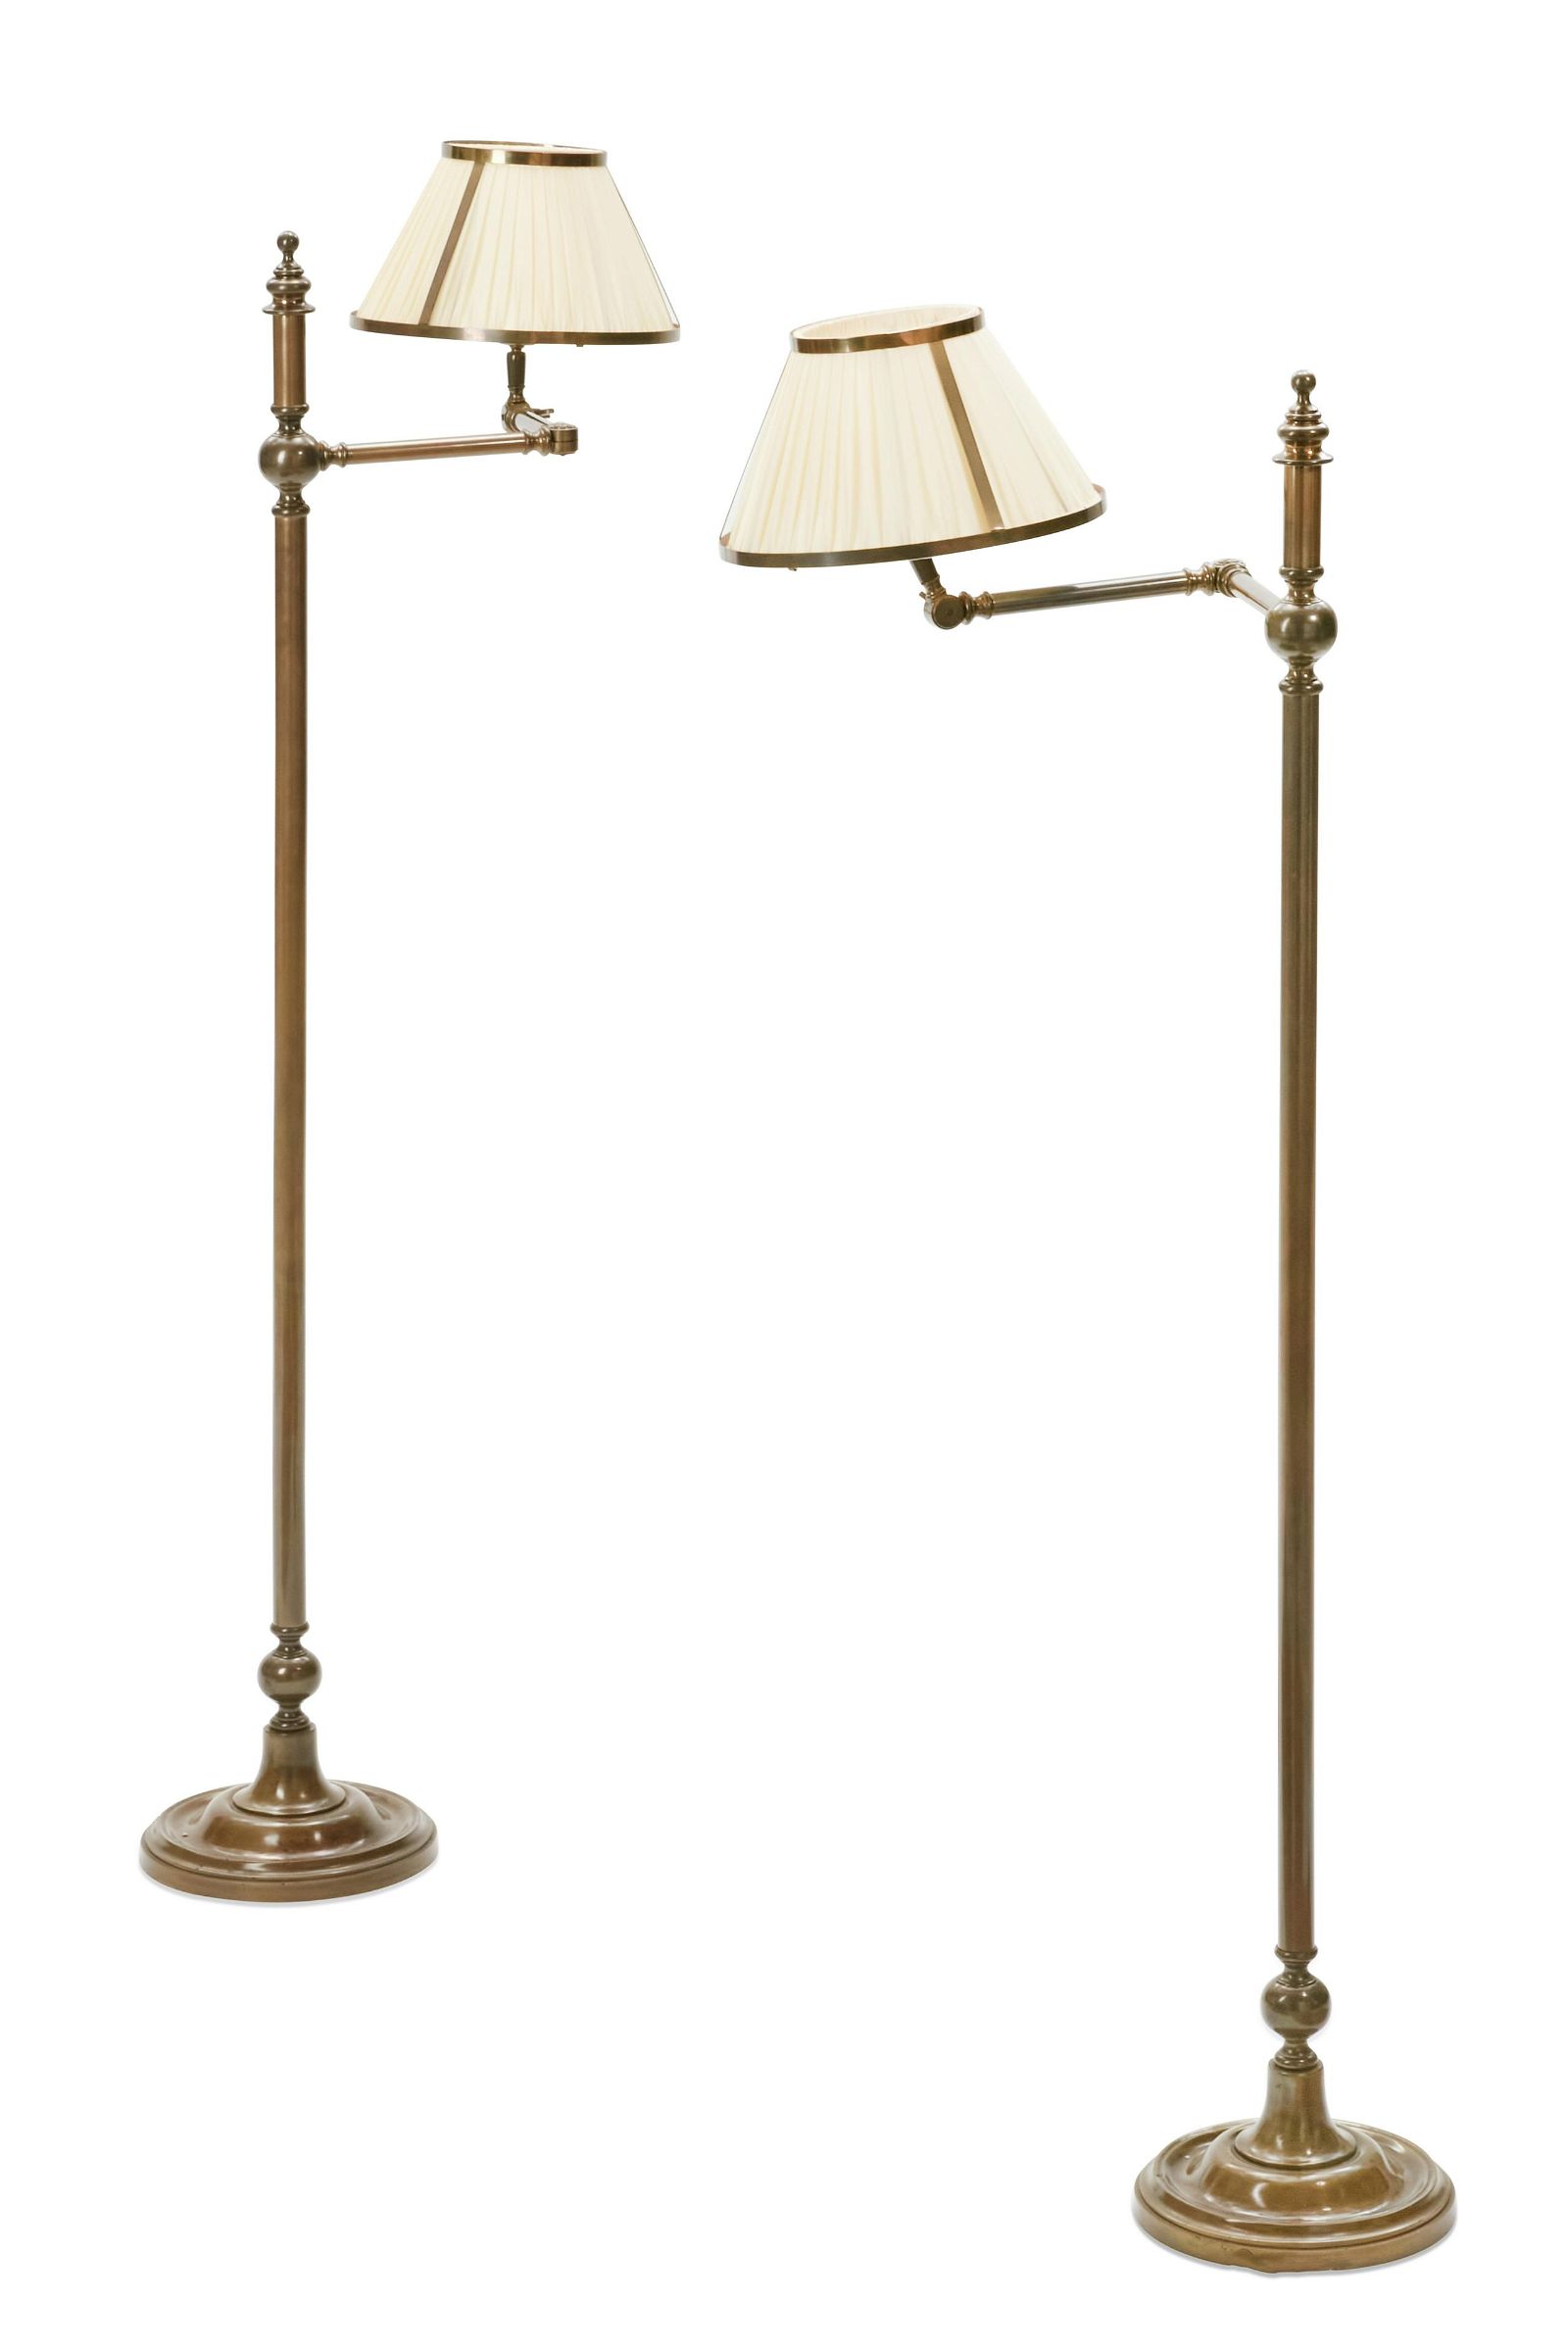 A PAIR OF BRUSHED BRASS ADJUSTABLE